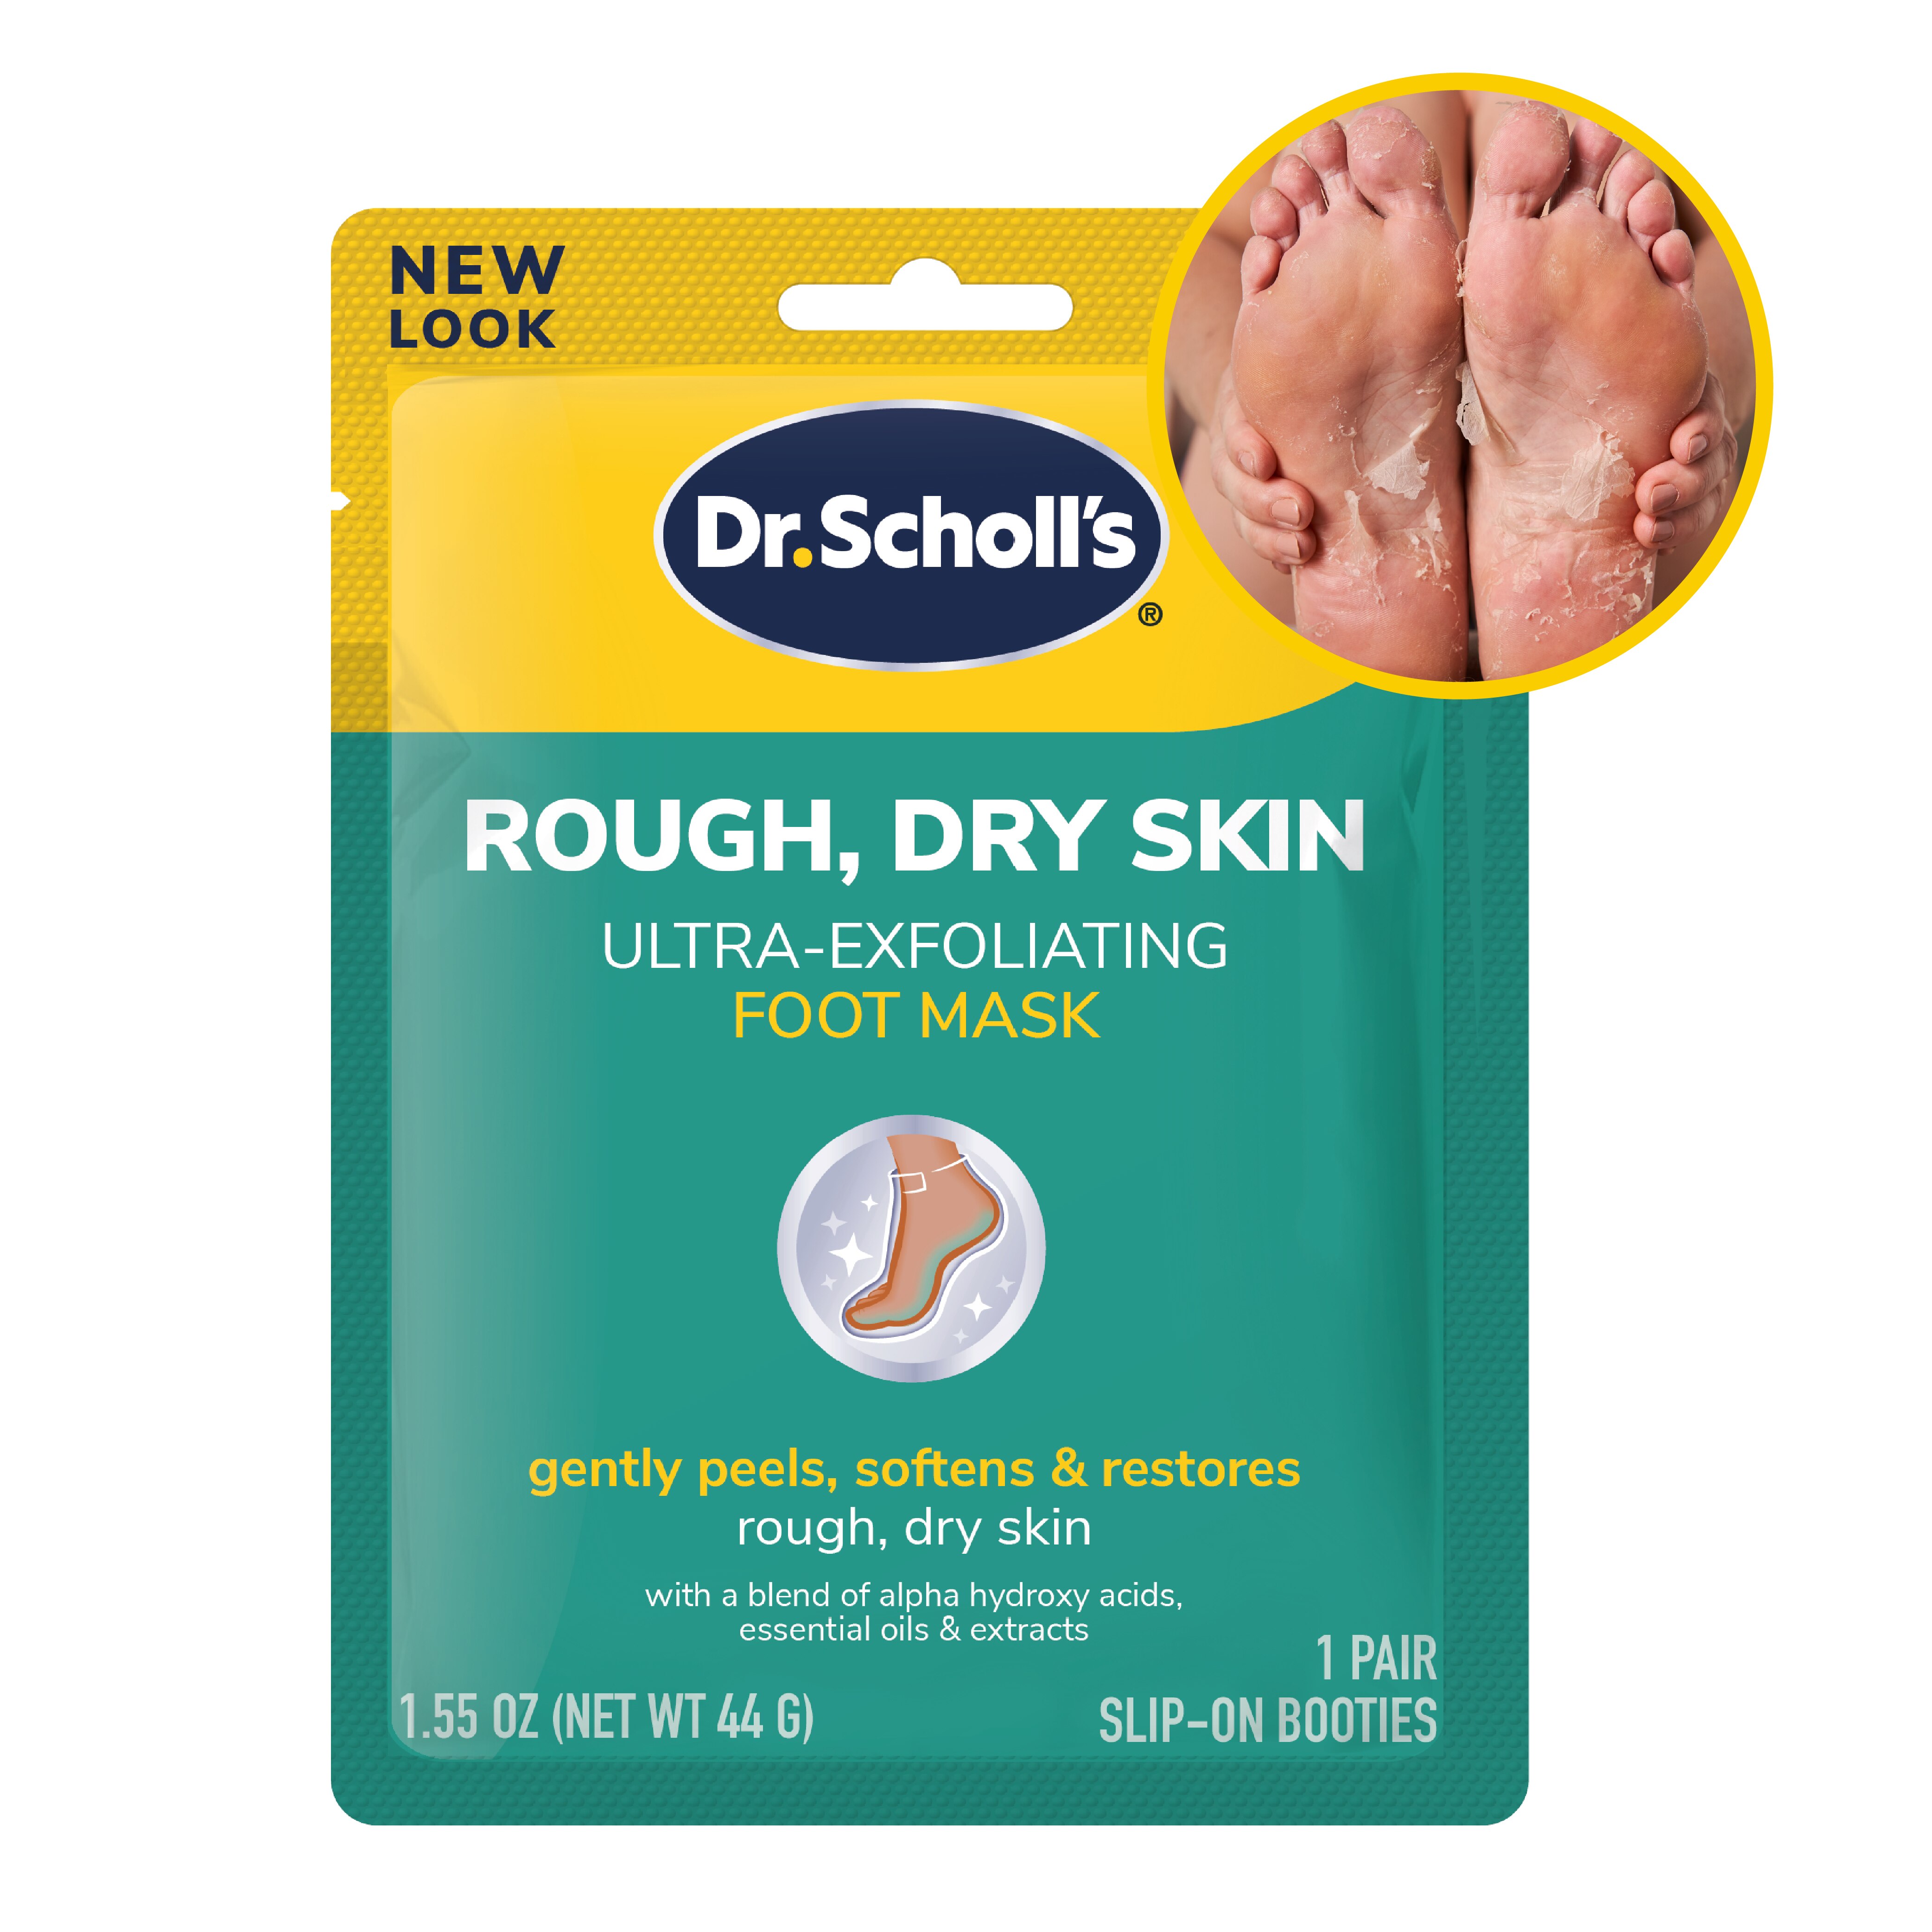 Dr. Scholl's Ultra Exfoliating Foot Mask, 1 pair